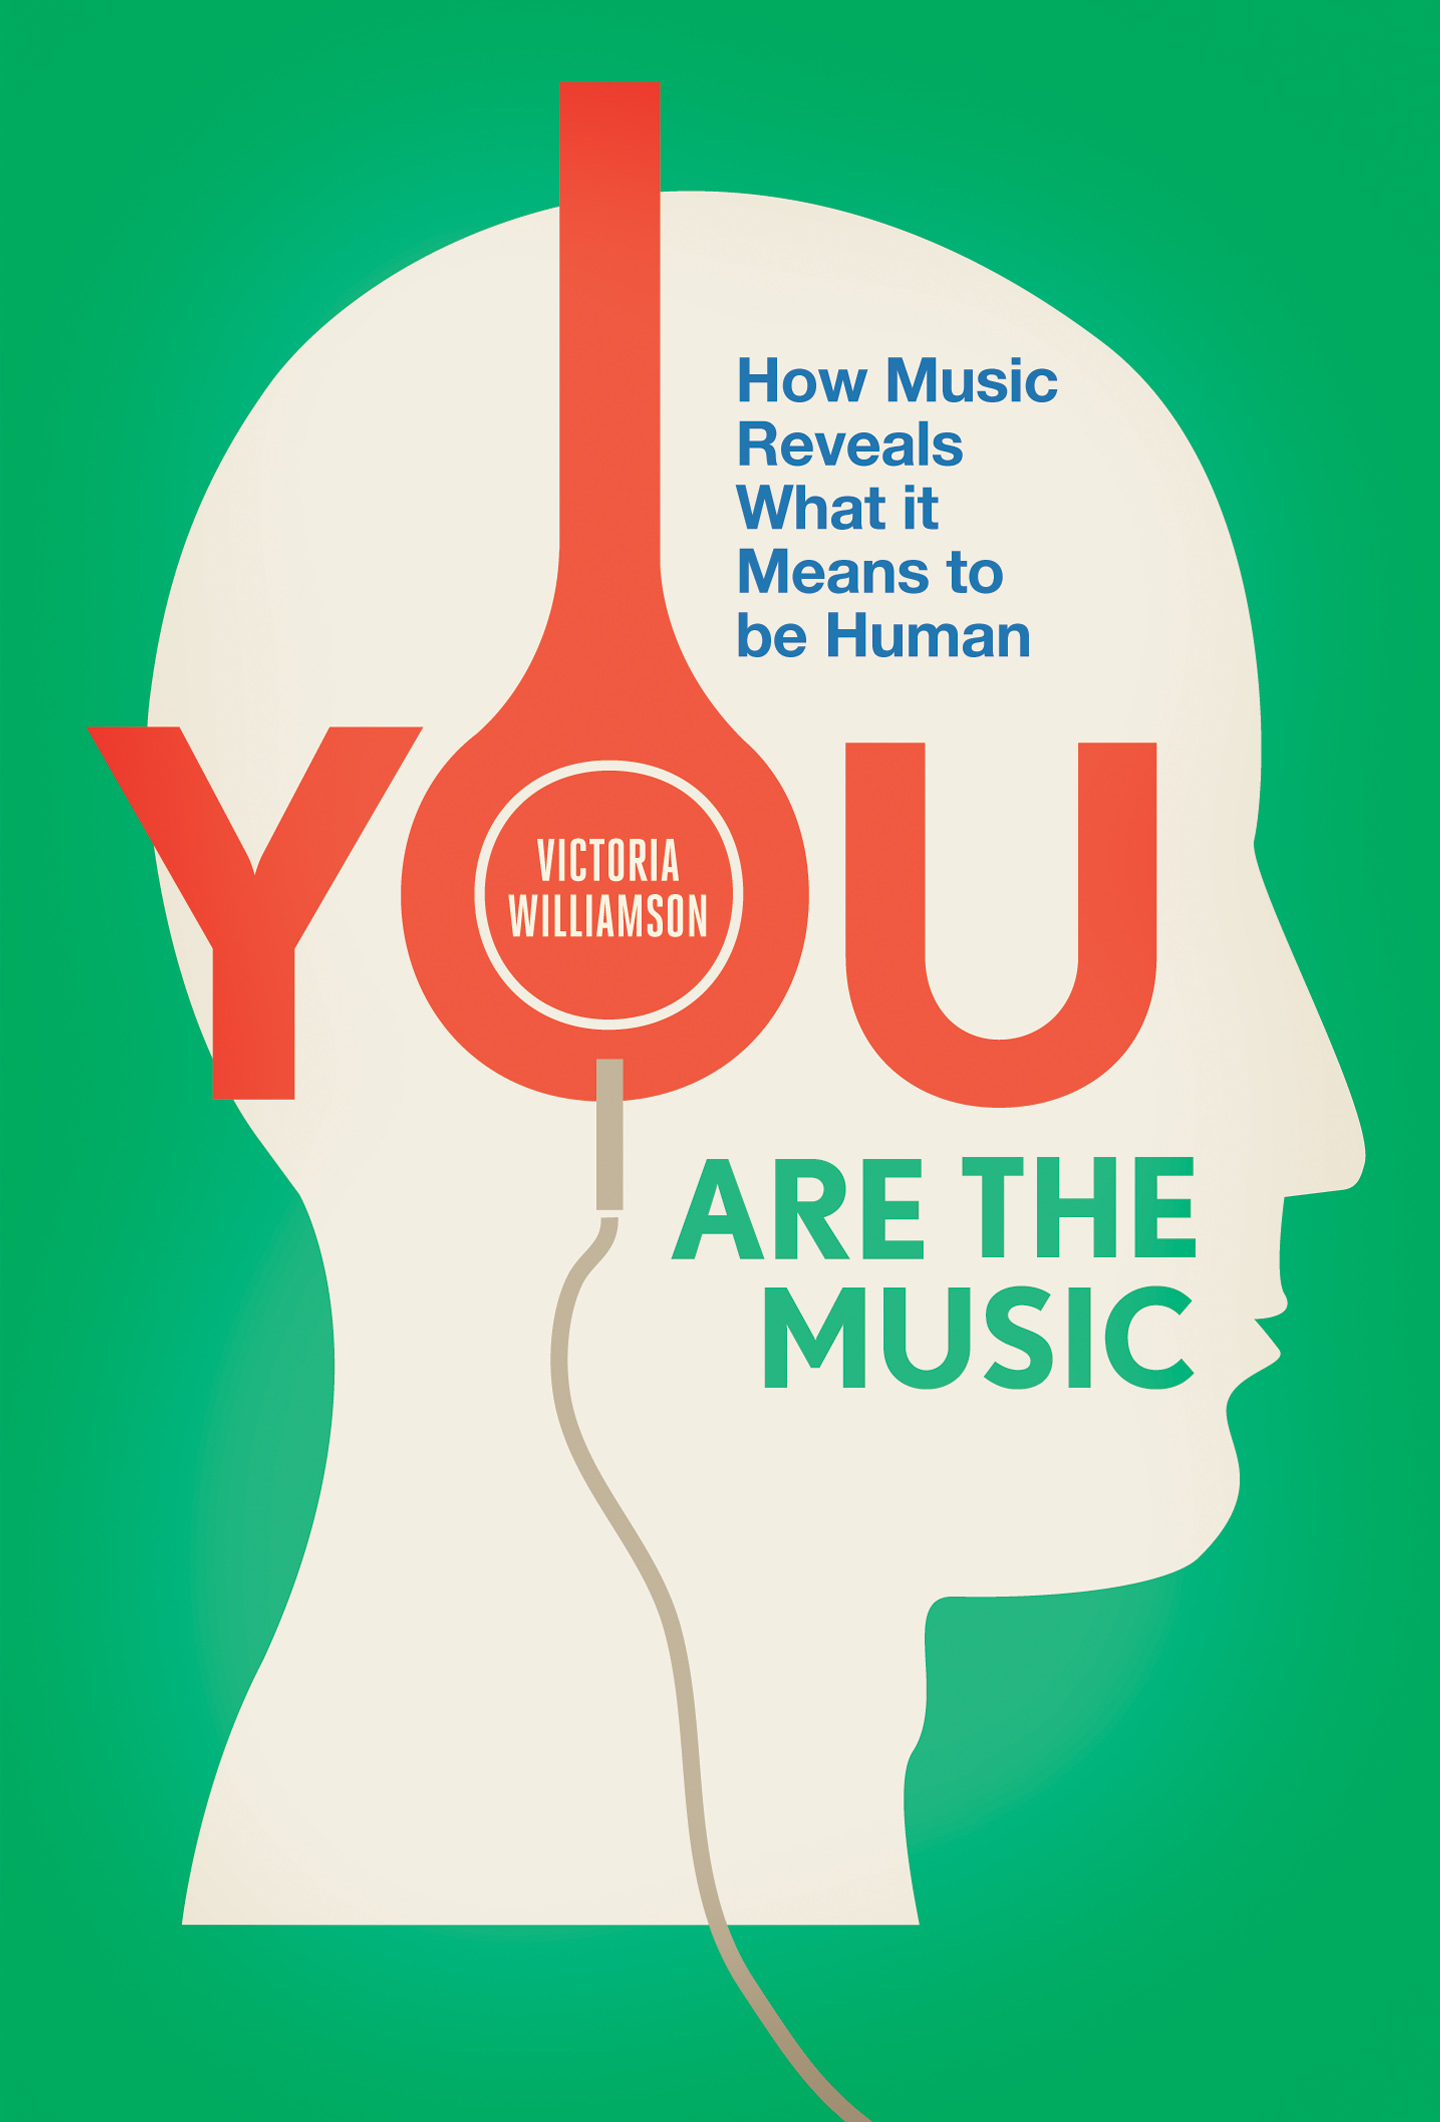 You Are the Music